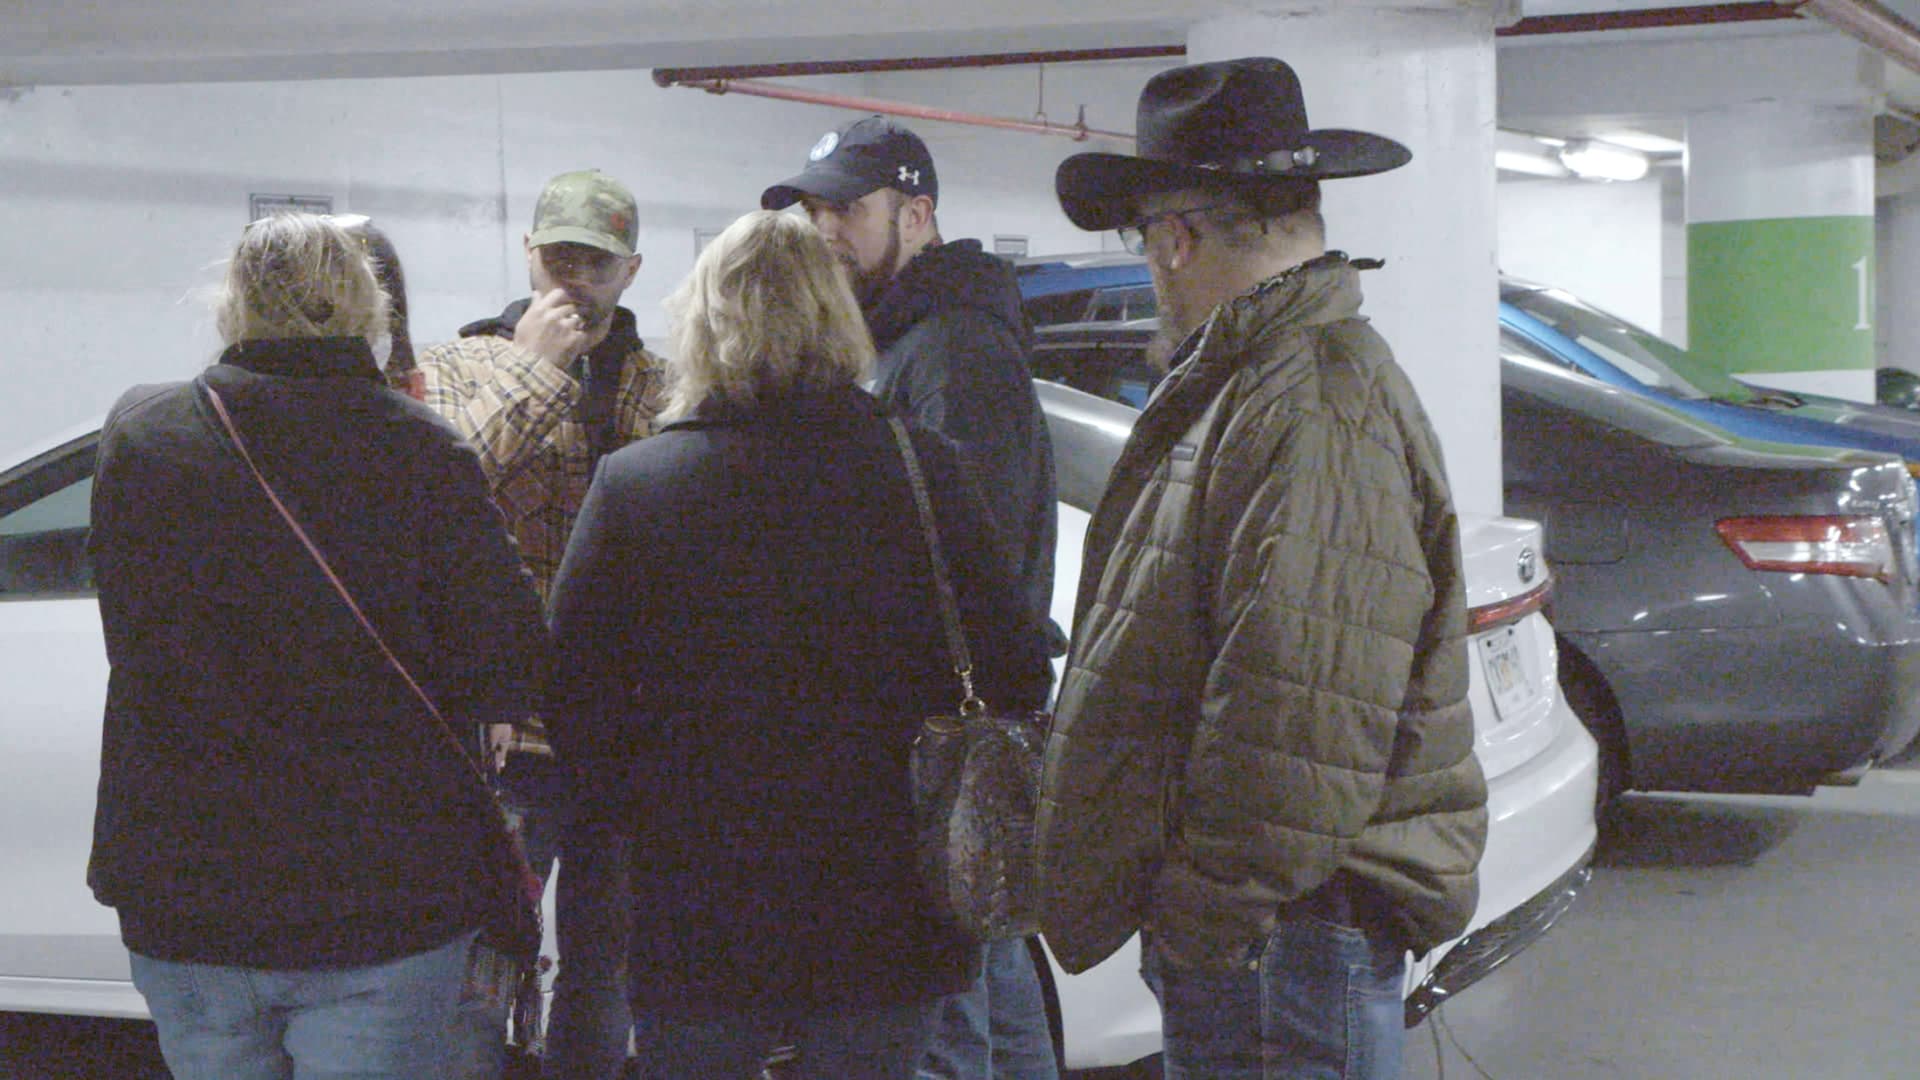 Enrique Tarrio, Chairman of the Proud Boys, and Stewart Rhodes, founder of the Oath Keepers, attend a meeting in a garage in Washington, U.S. in a still image taken from video January 5, 2021, the day before the January 6 riot.